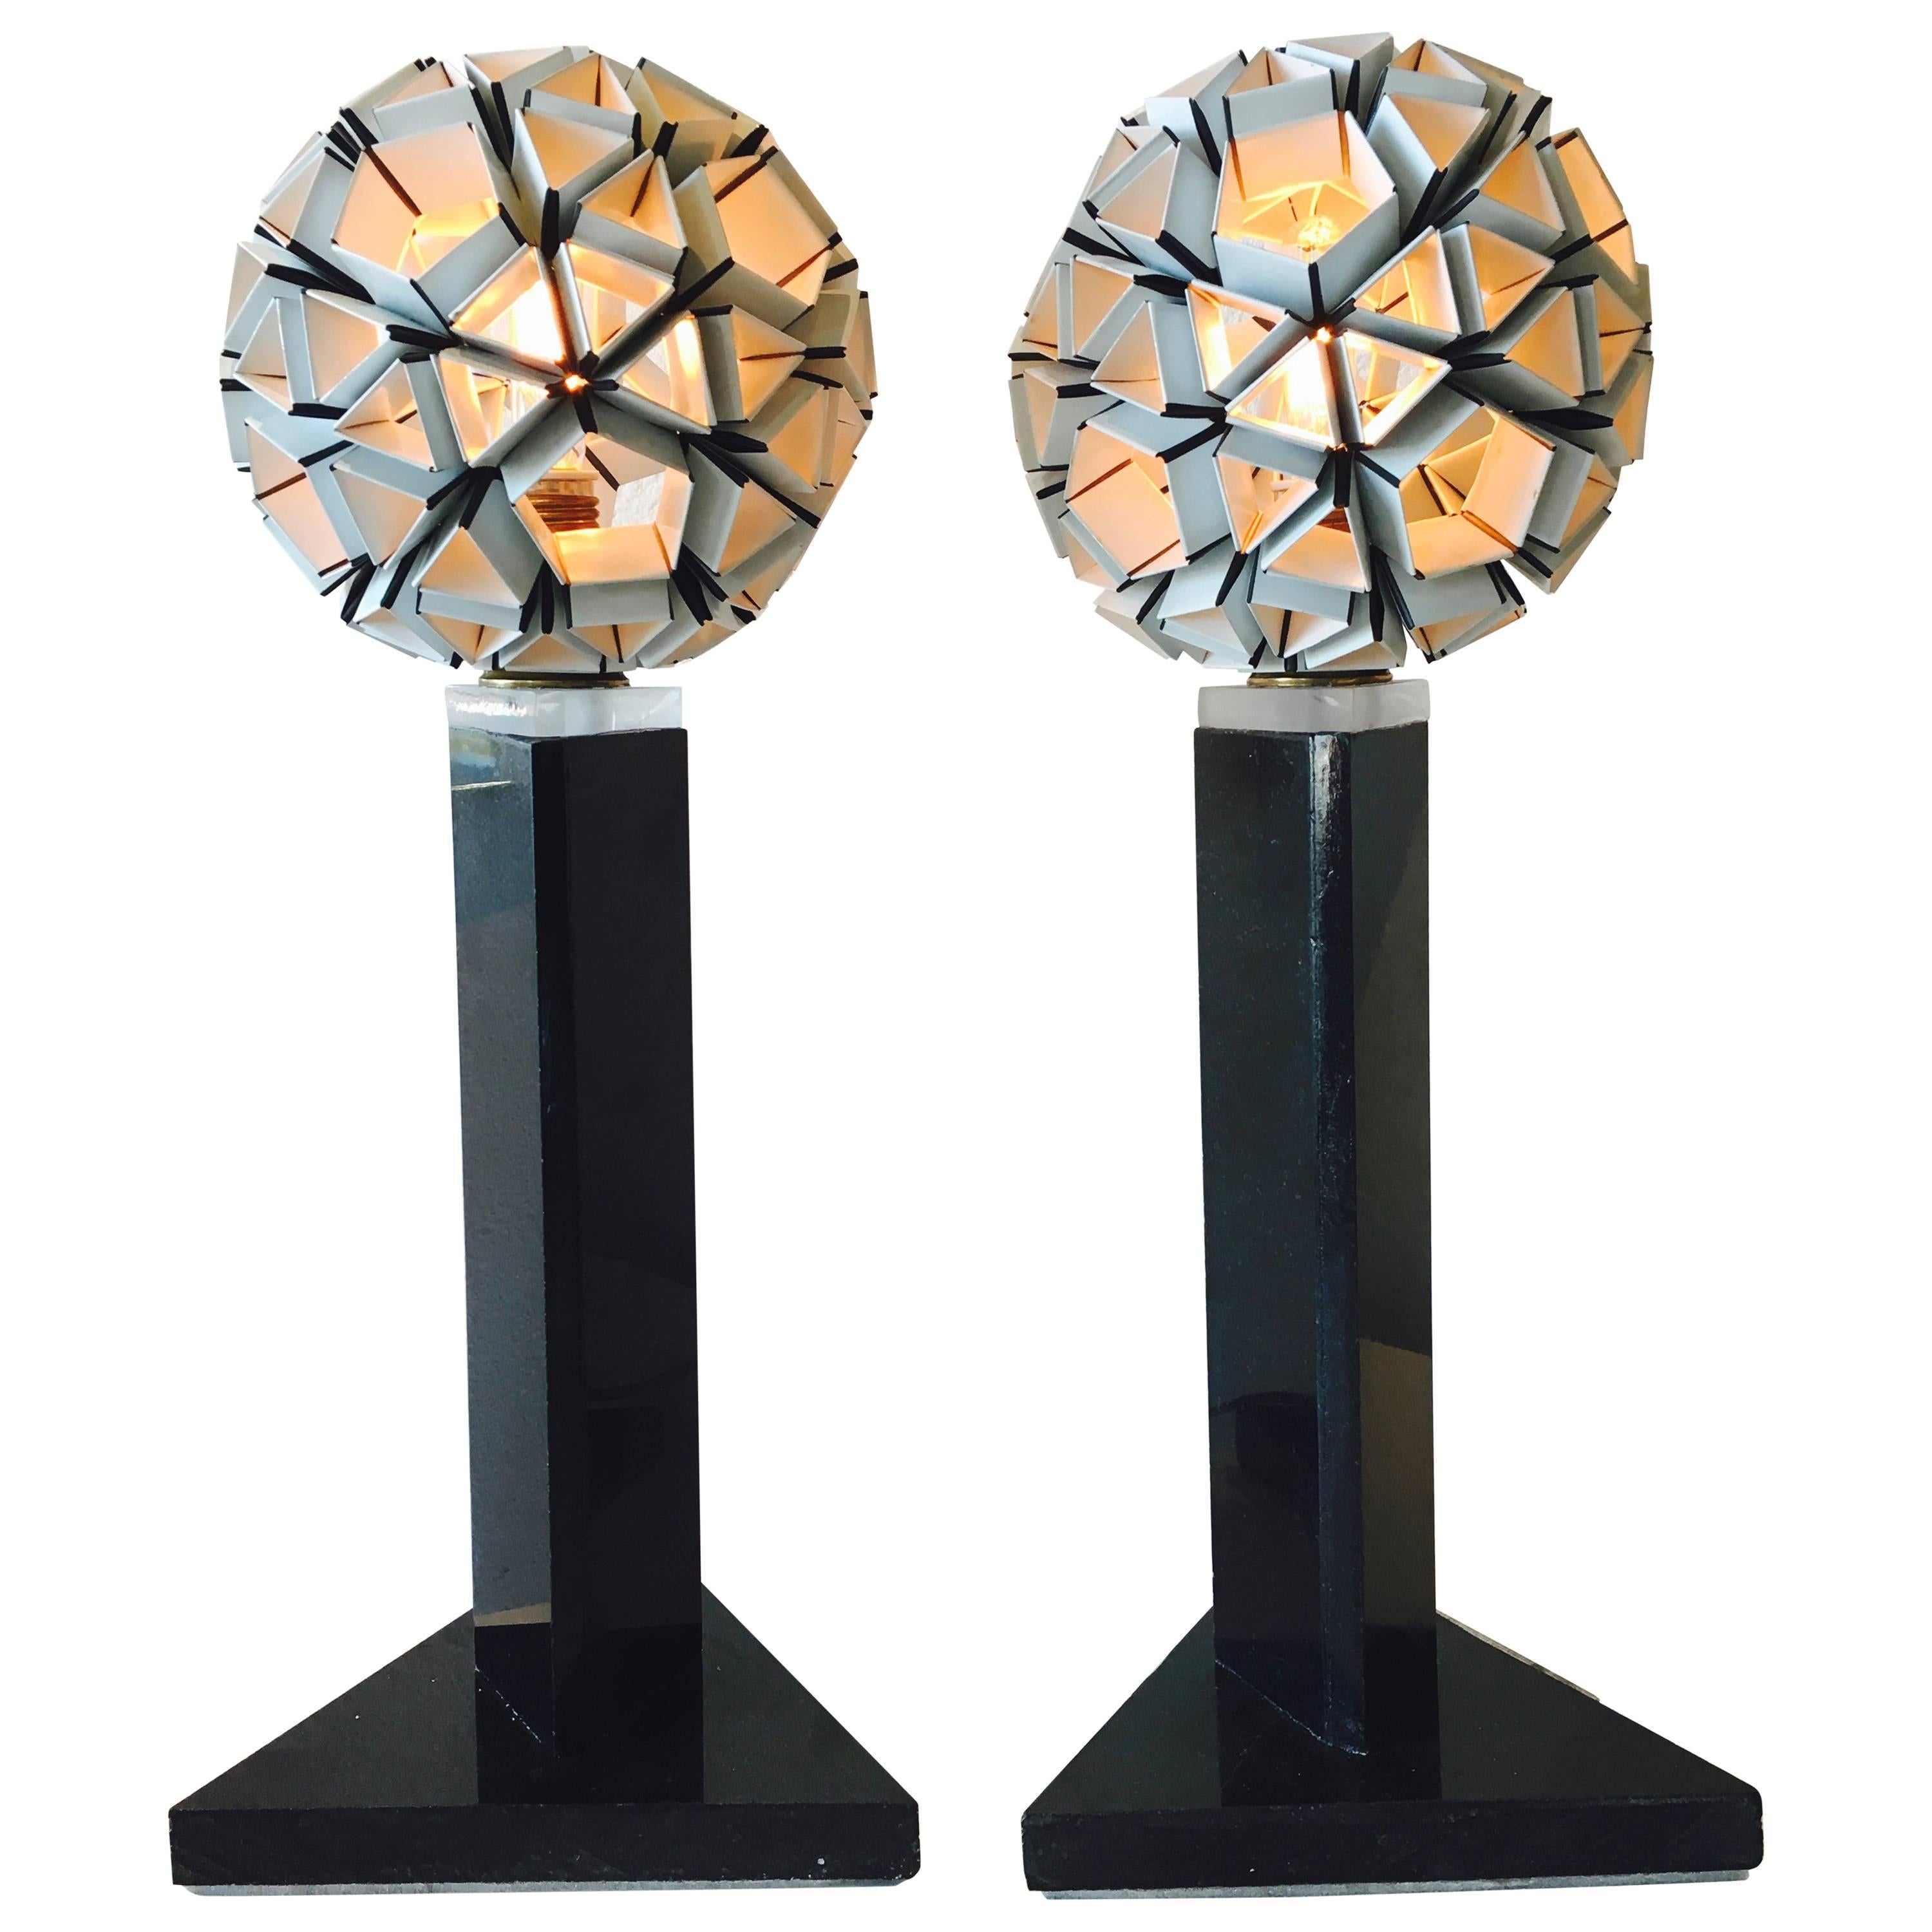 One-of-a-Kind Pair of "Dandelion" Lamps, Laminate Origami, Black Marble, Lucite For Sale